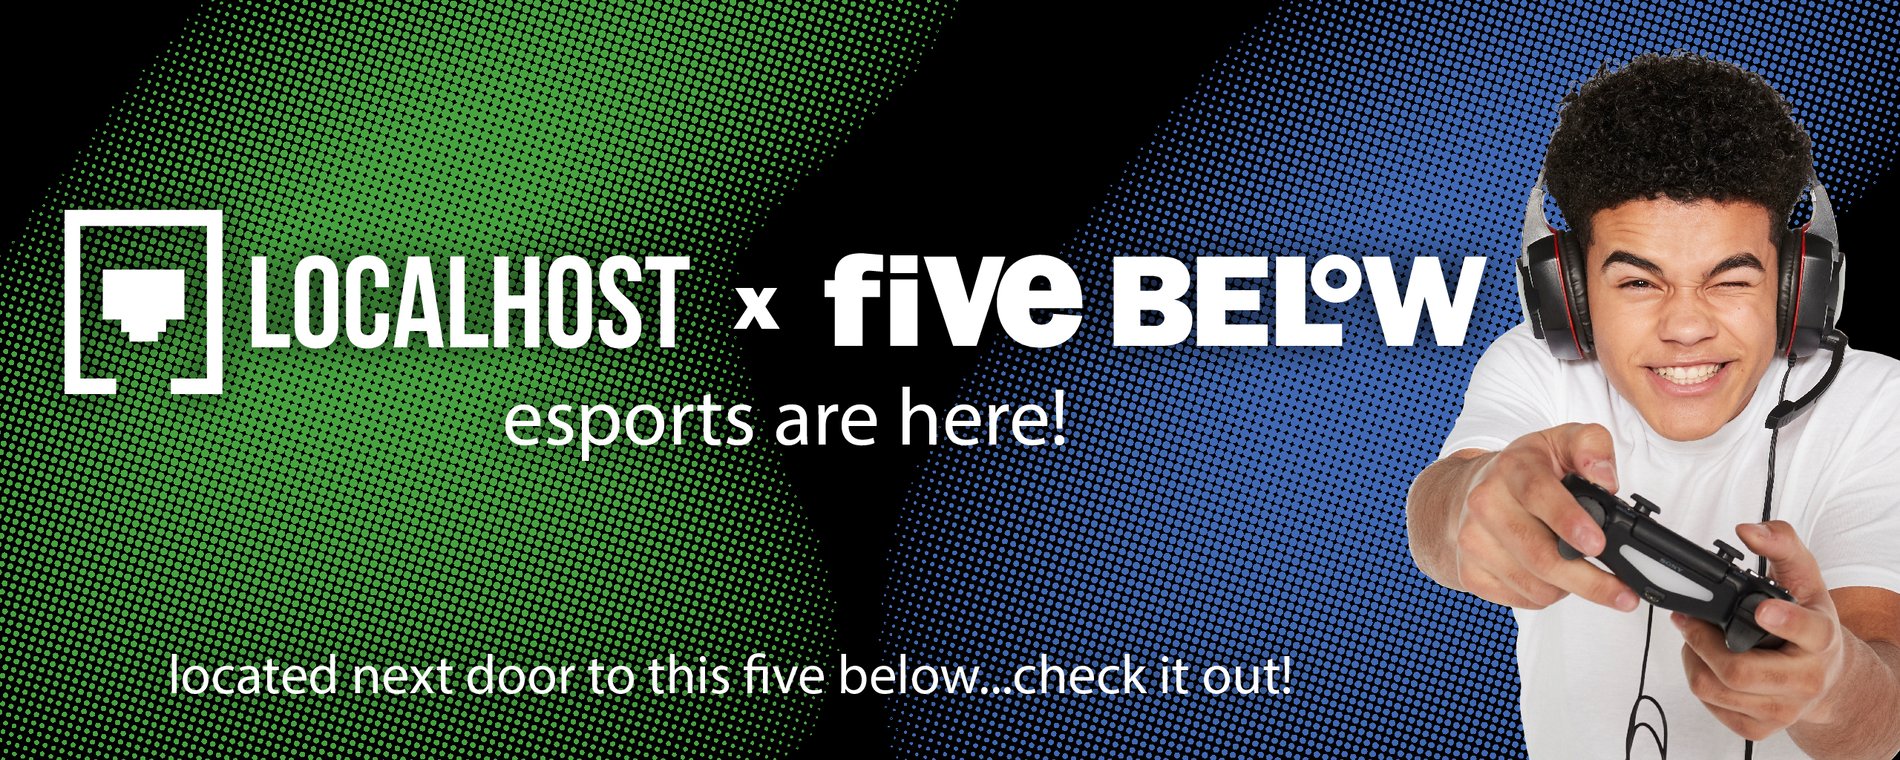 localhost + five below logos. Esports are here! Located next door to this five below...check it out!